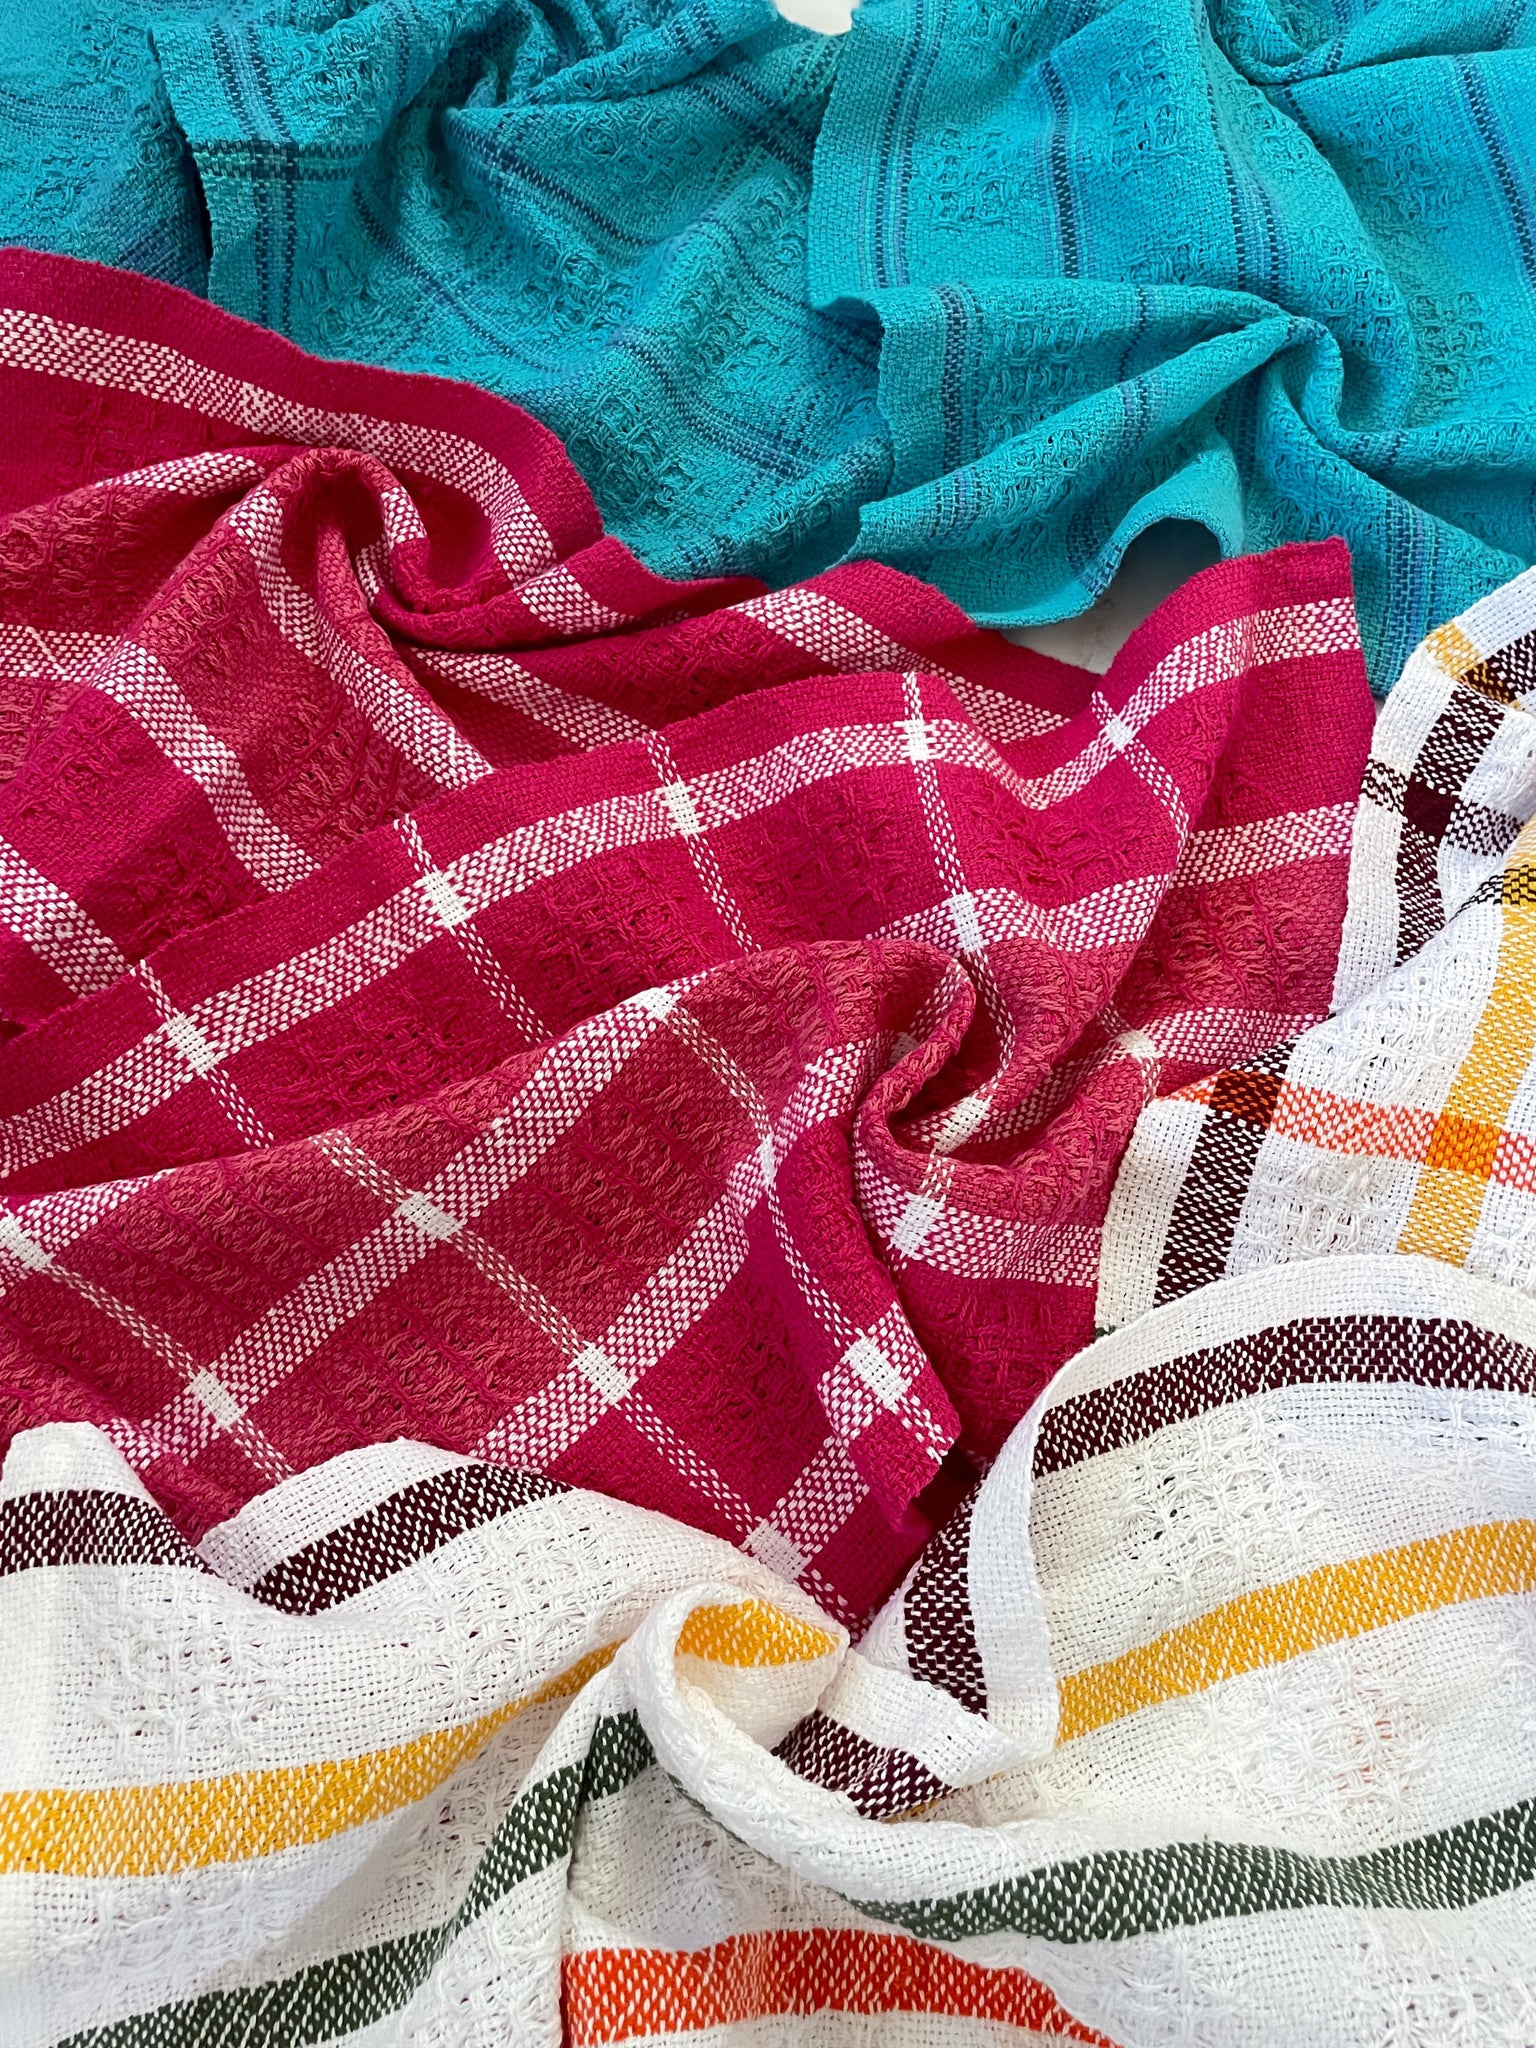 Designing With Color - Waffle Weave Towels – Cotton Clouds Inc.